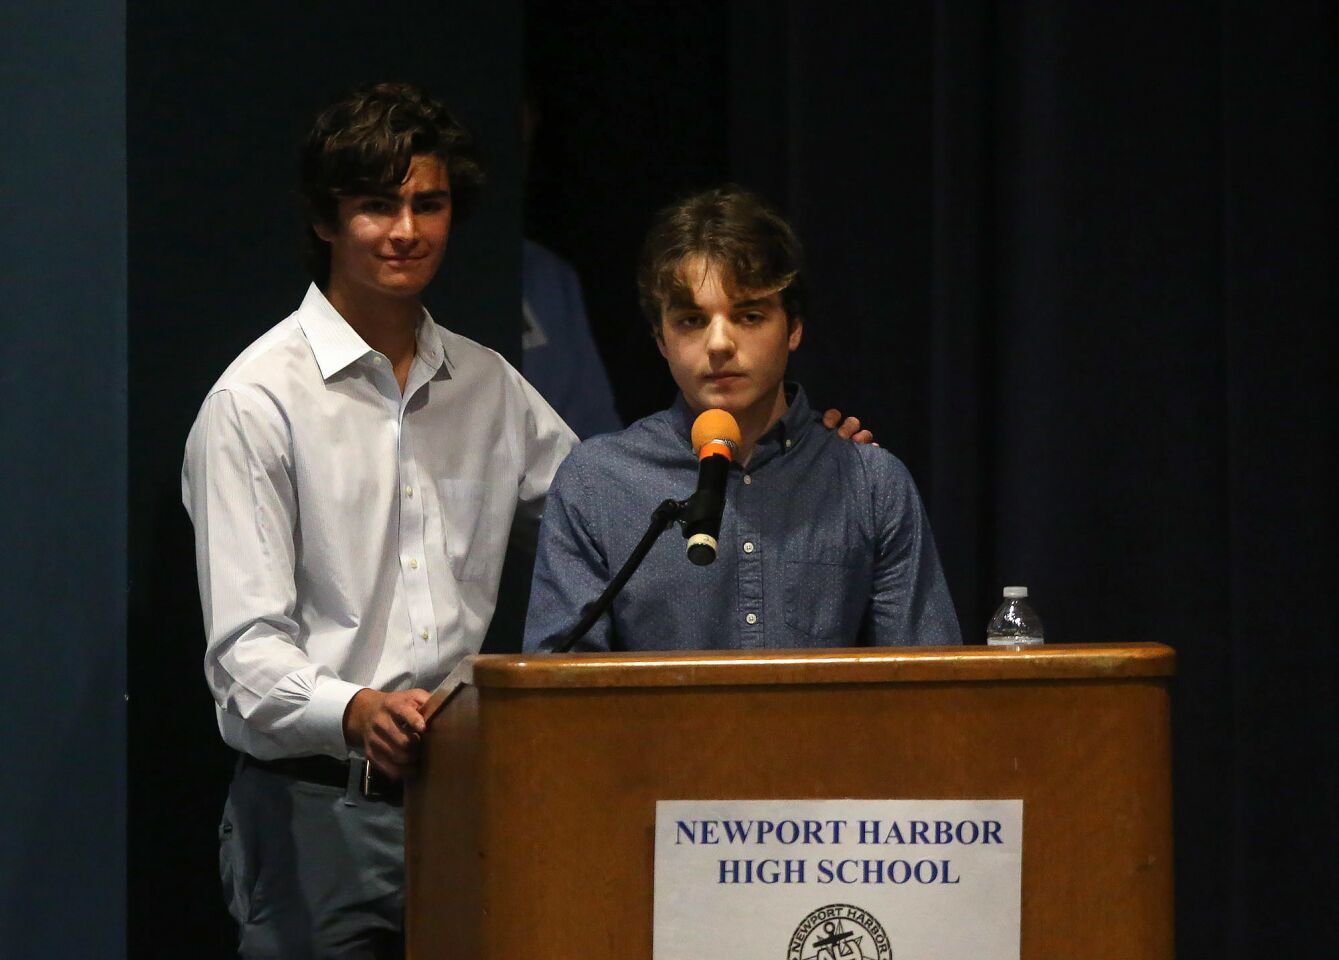 Newport Harbor High School seniors Ben Kwong, left, and Max Drakeford speak during Monday's community meeting at the school to address Nazi symbolism that some area students used during an off-campus party over the weekend. “What we need to focus on is educating people to the point that they aren’t ignorant enough to commit something like this,” Drakeford said.